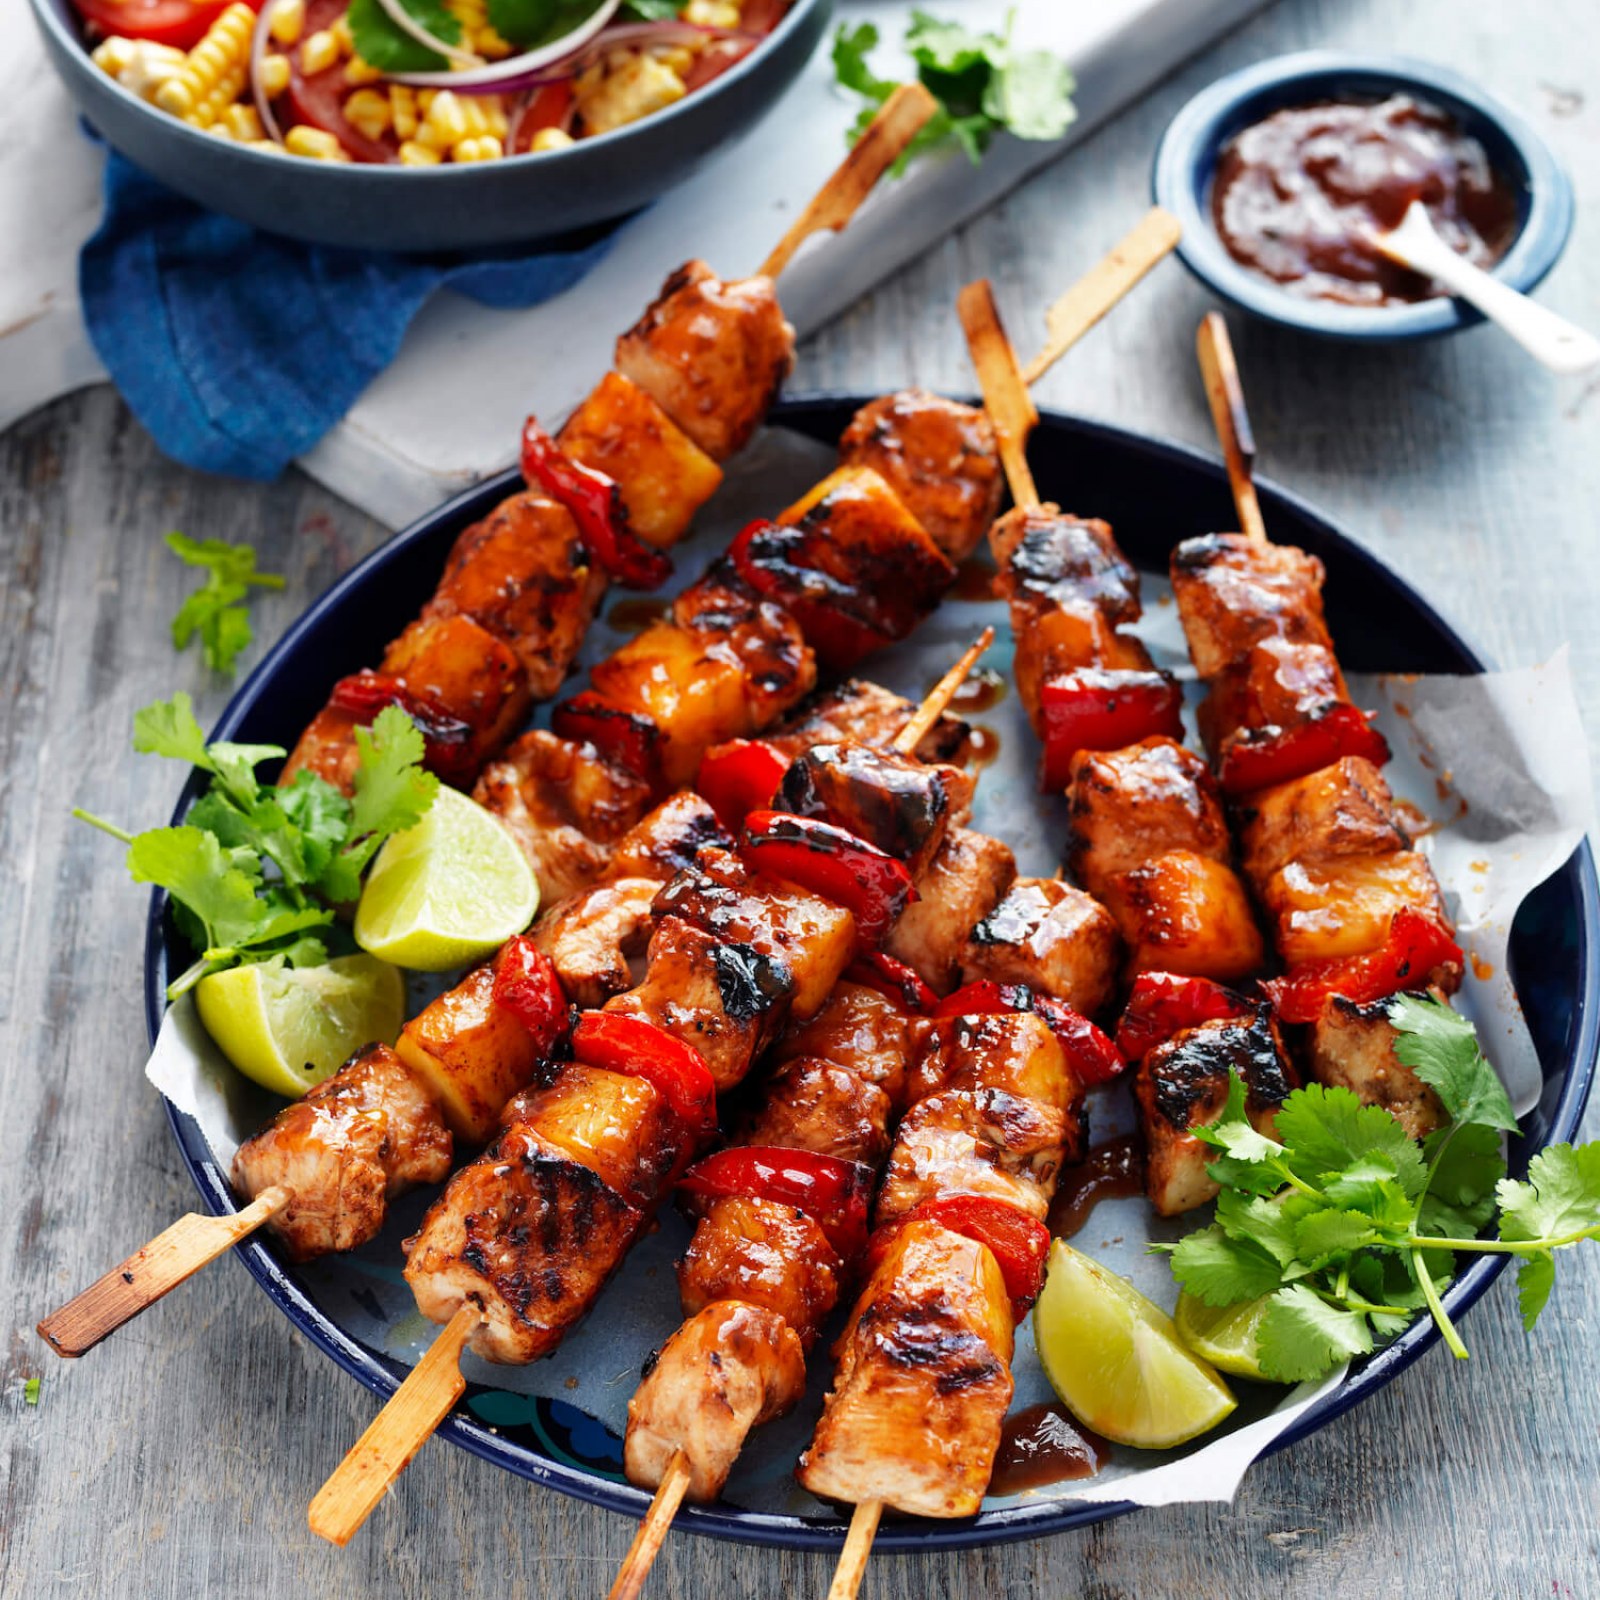 to from Free | Brands | myfoodbook BBQ Cook Australia\'s skewers Recipes make Best How